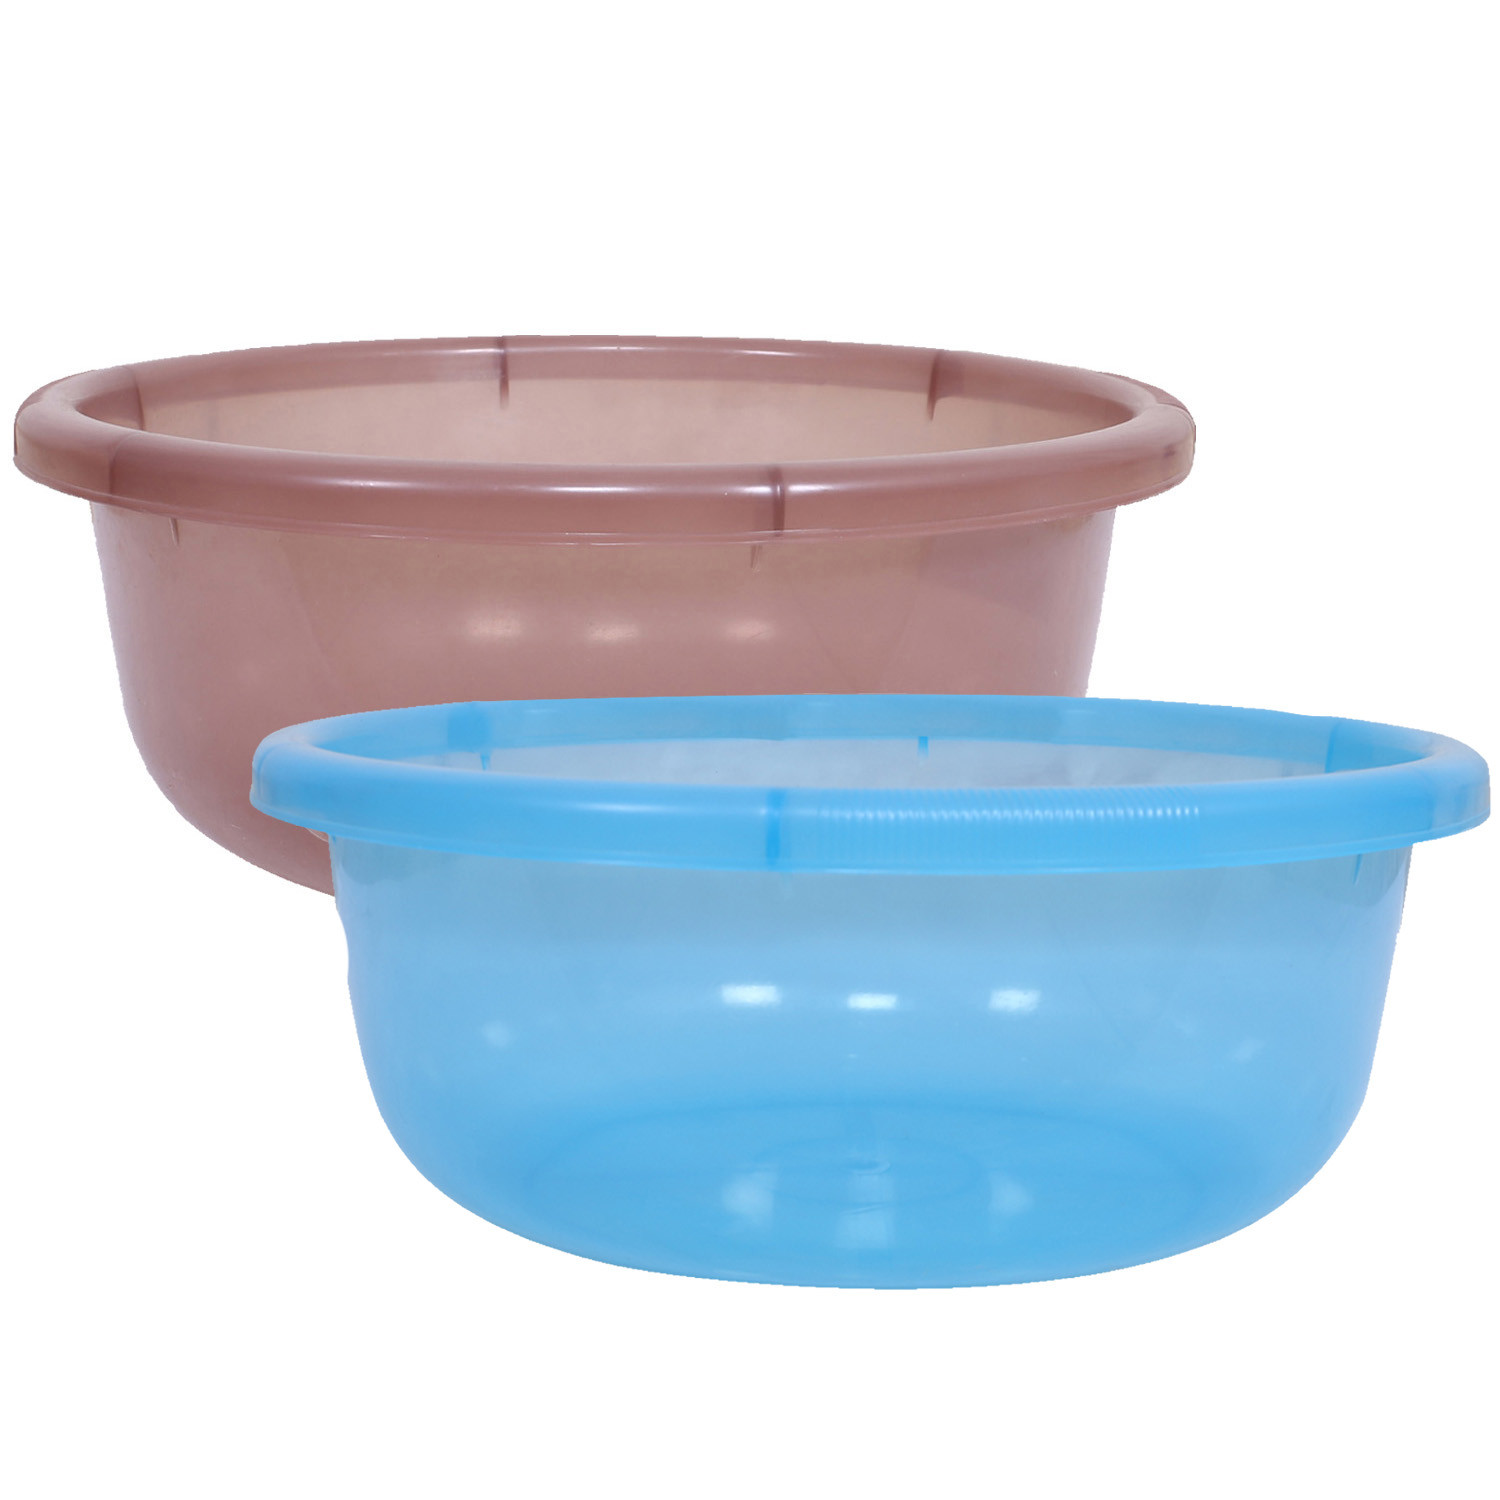 Kuber Industries Durable Deep Bath Tub|Versatile Short Livestock Feeding Pan|Unbreakable Plastic Utility Gaint Basin for Baby Bathing,Washing Clothes,26 Litre,Pack of 2 (Brown & Sky Blue)